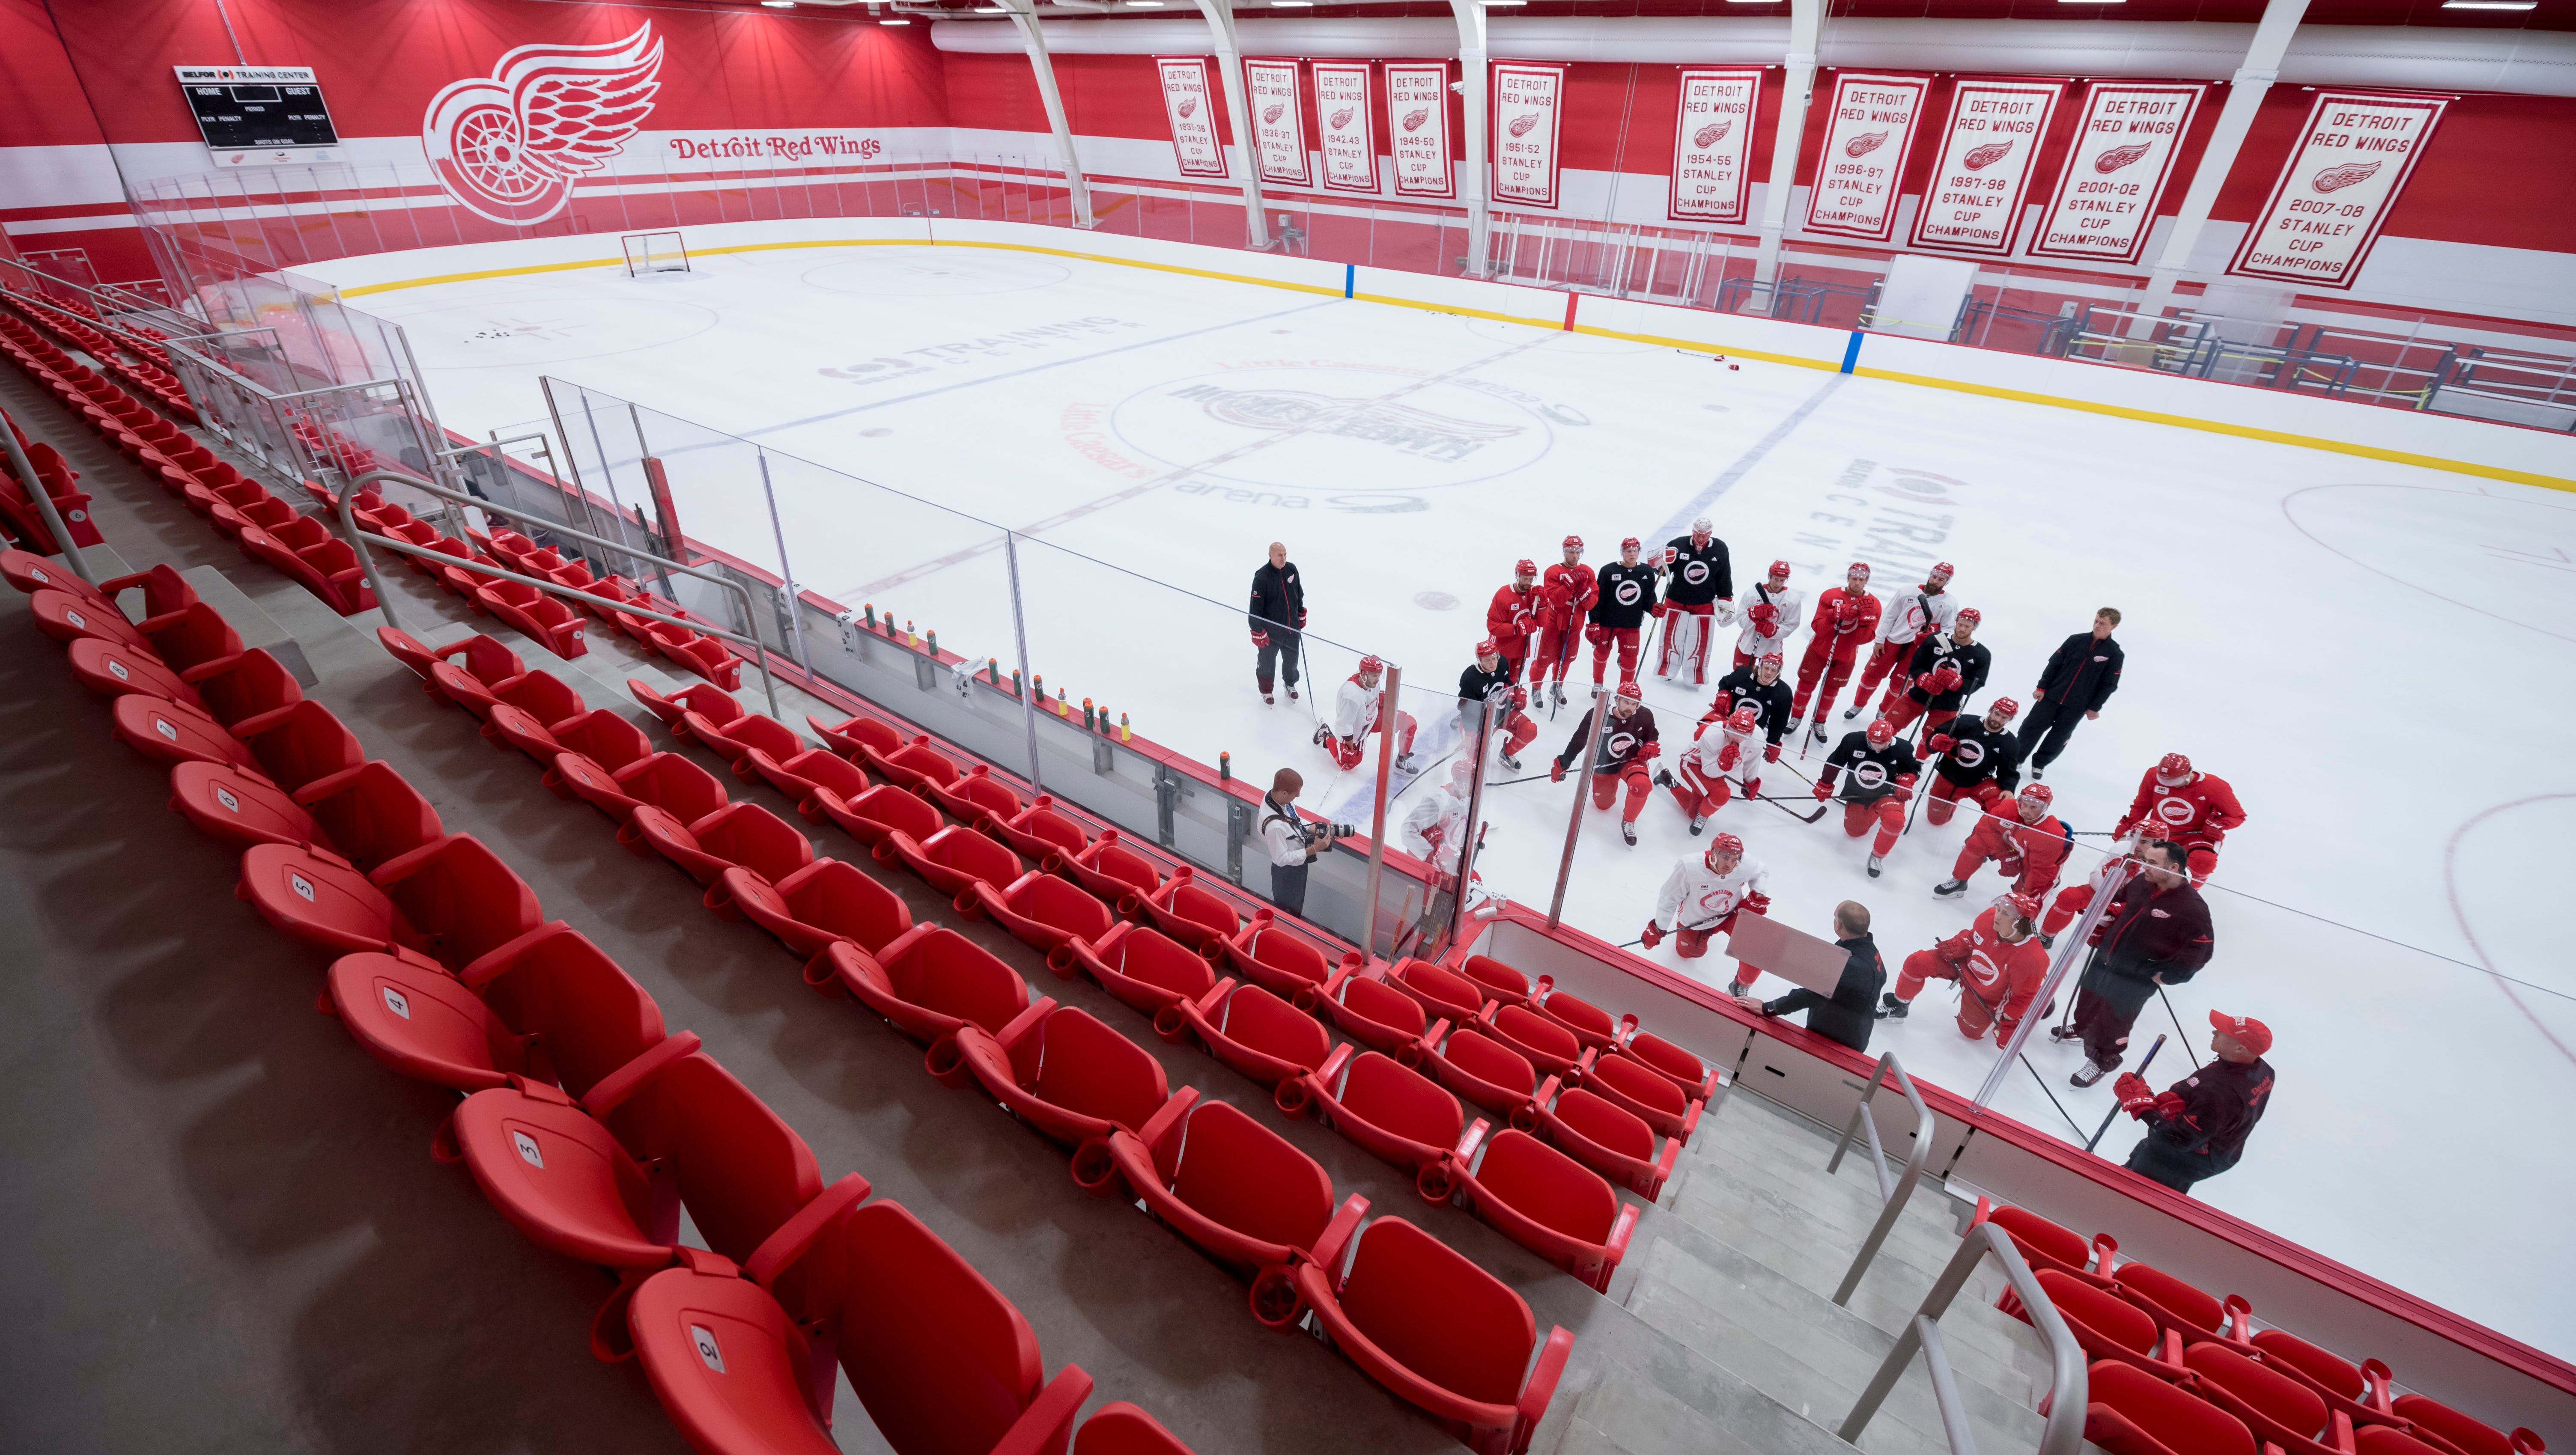 Detroit head coach Jeff Blashill goes over plays during practice on the practice rink inside Little Caesars Arena.